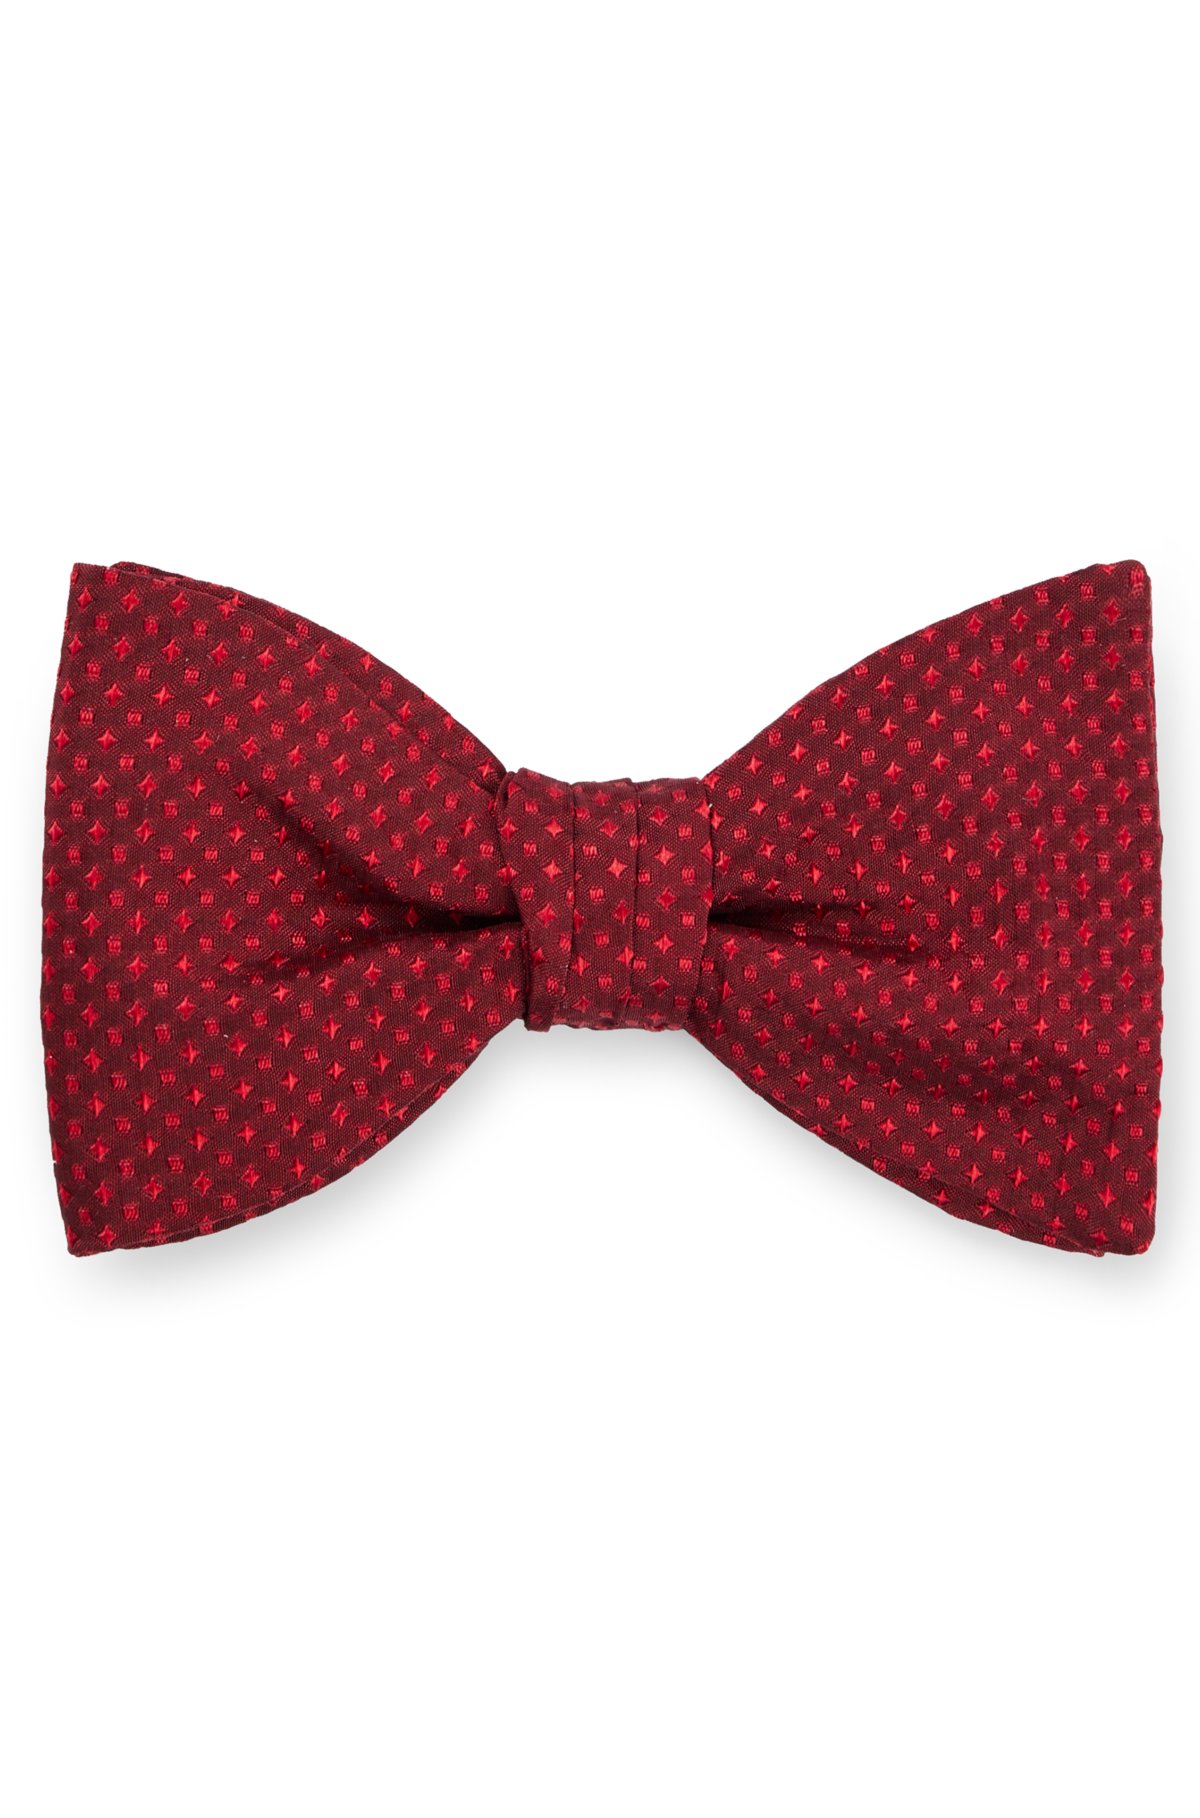 Polka Dot Bow Ties handmade in America for over 20 years!